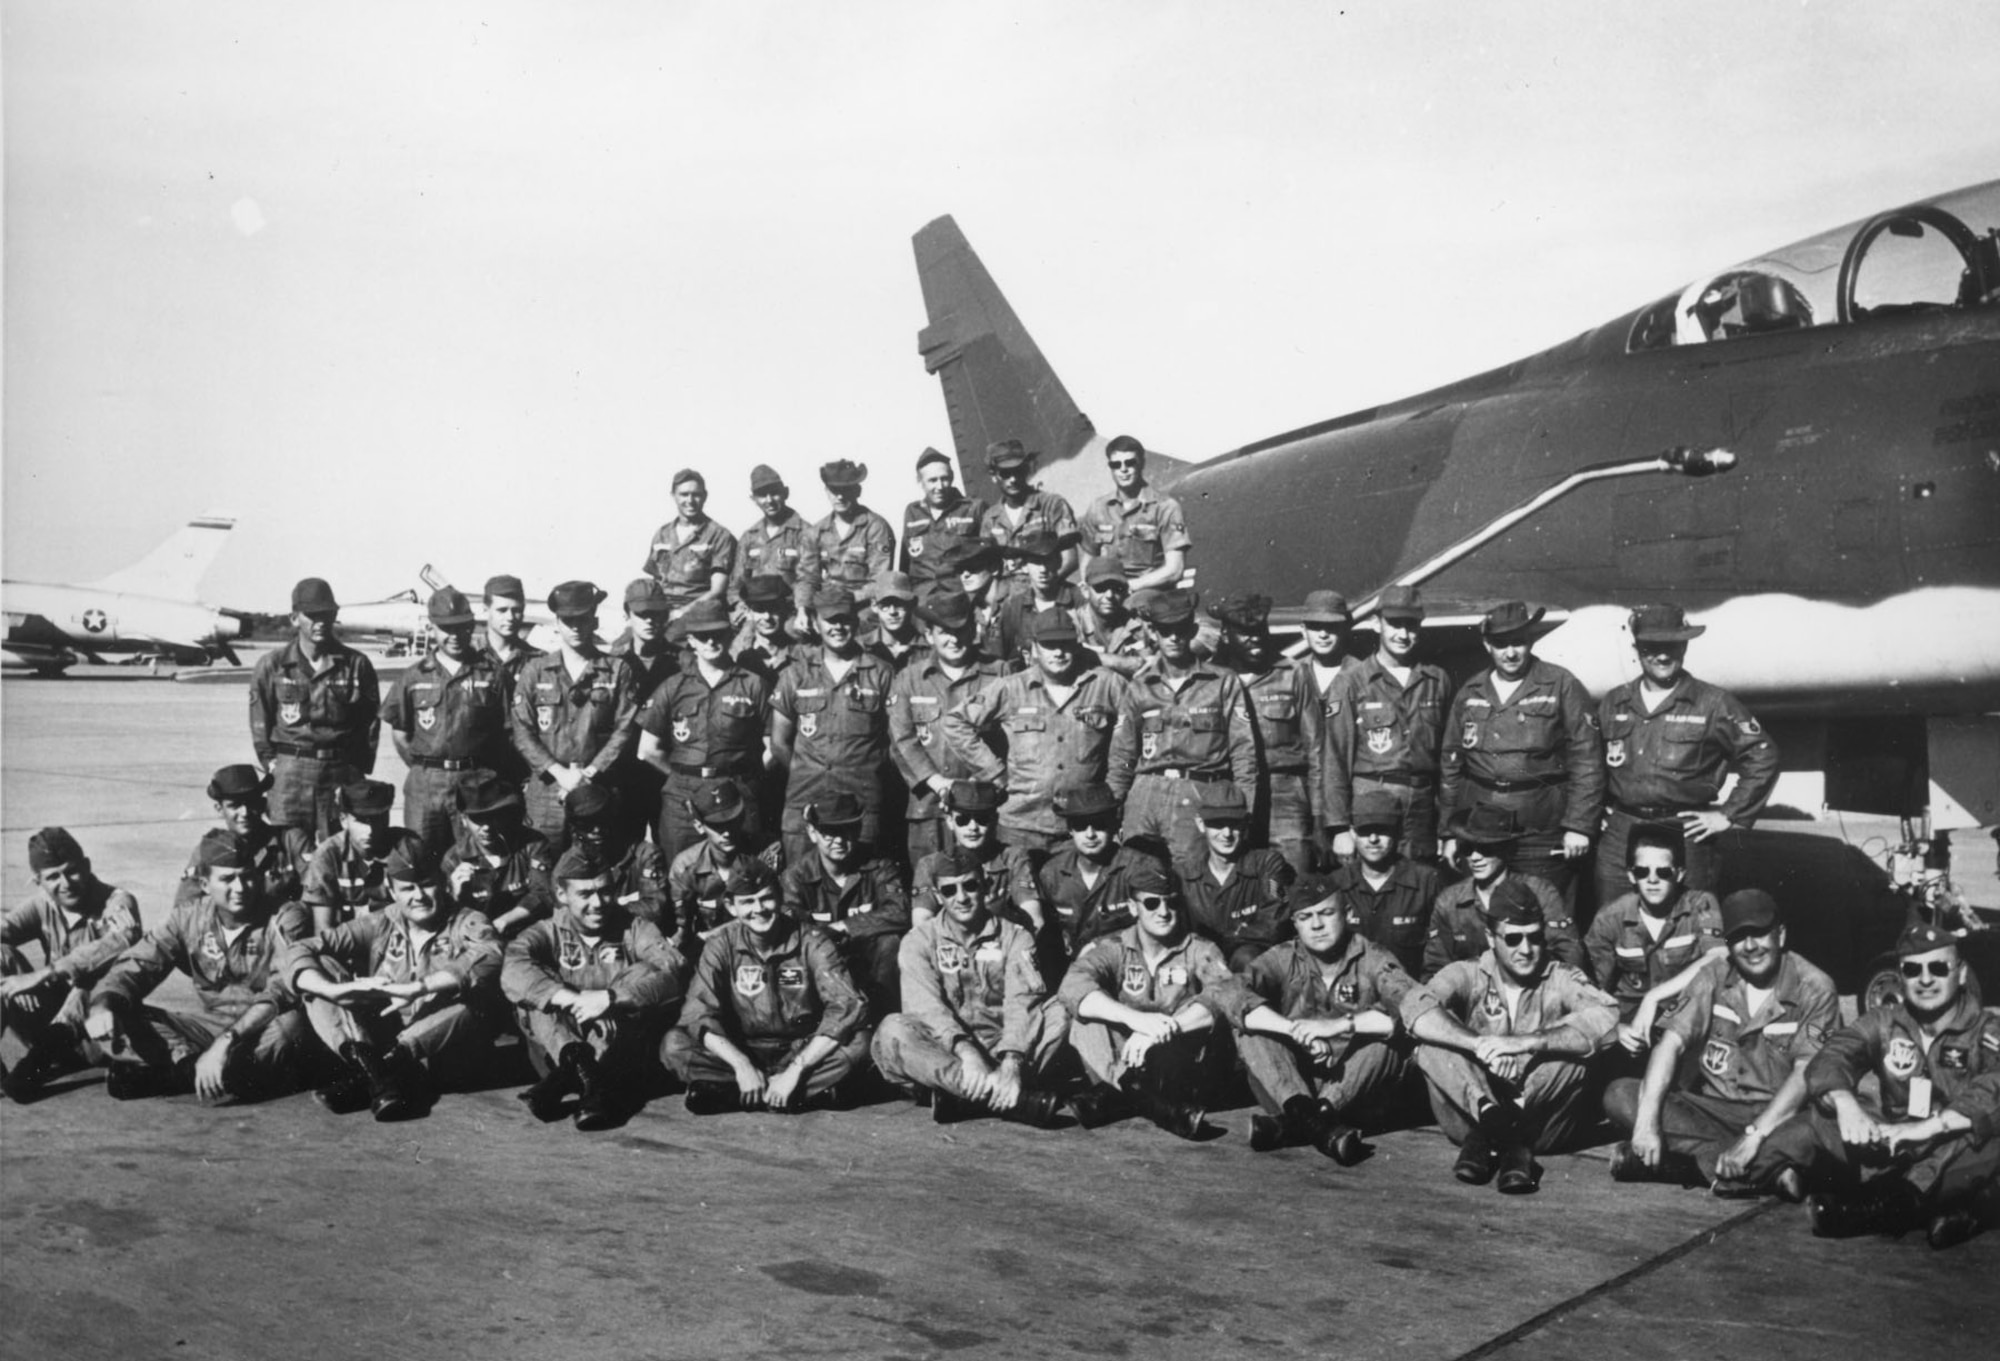 The pioneers—Wild Weasel Detachment, 6234th Tactical Fighter Wing, Korat, Thailand. The first Wild Weasel aircrews are (front, l to r): Capt. Walt Lifsey, Capt. Sandy Sandelius, Capt. Ed White, Maj. Garry Willard, Capt. Jack Donovan, Capt. Allen Lamb, Capt. John Pitchford, Capt. Maury Fricke, unknown and Maj. Bob Swartz (not pictured are Capt. Les Lindenmuth, Capt. Donald Madden and Capt. Robert Trier). (U.S. Air Force photo)